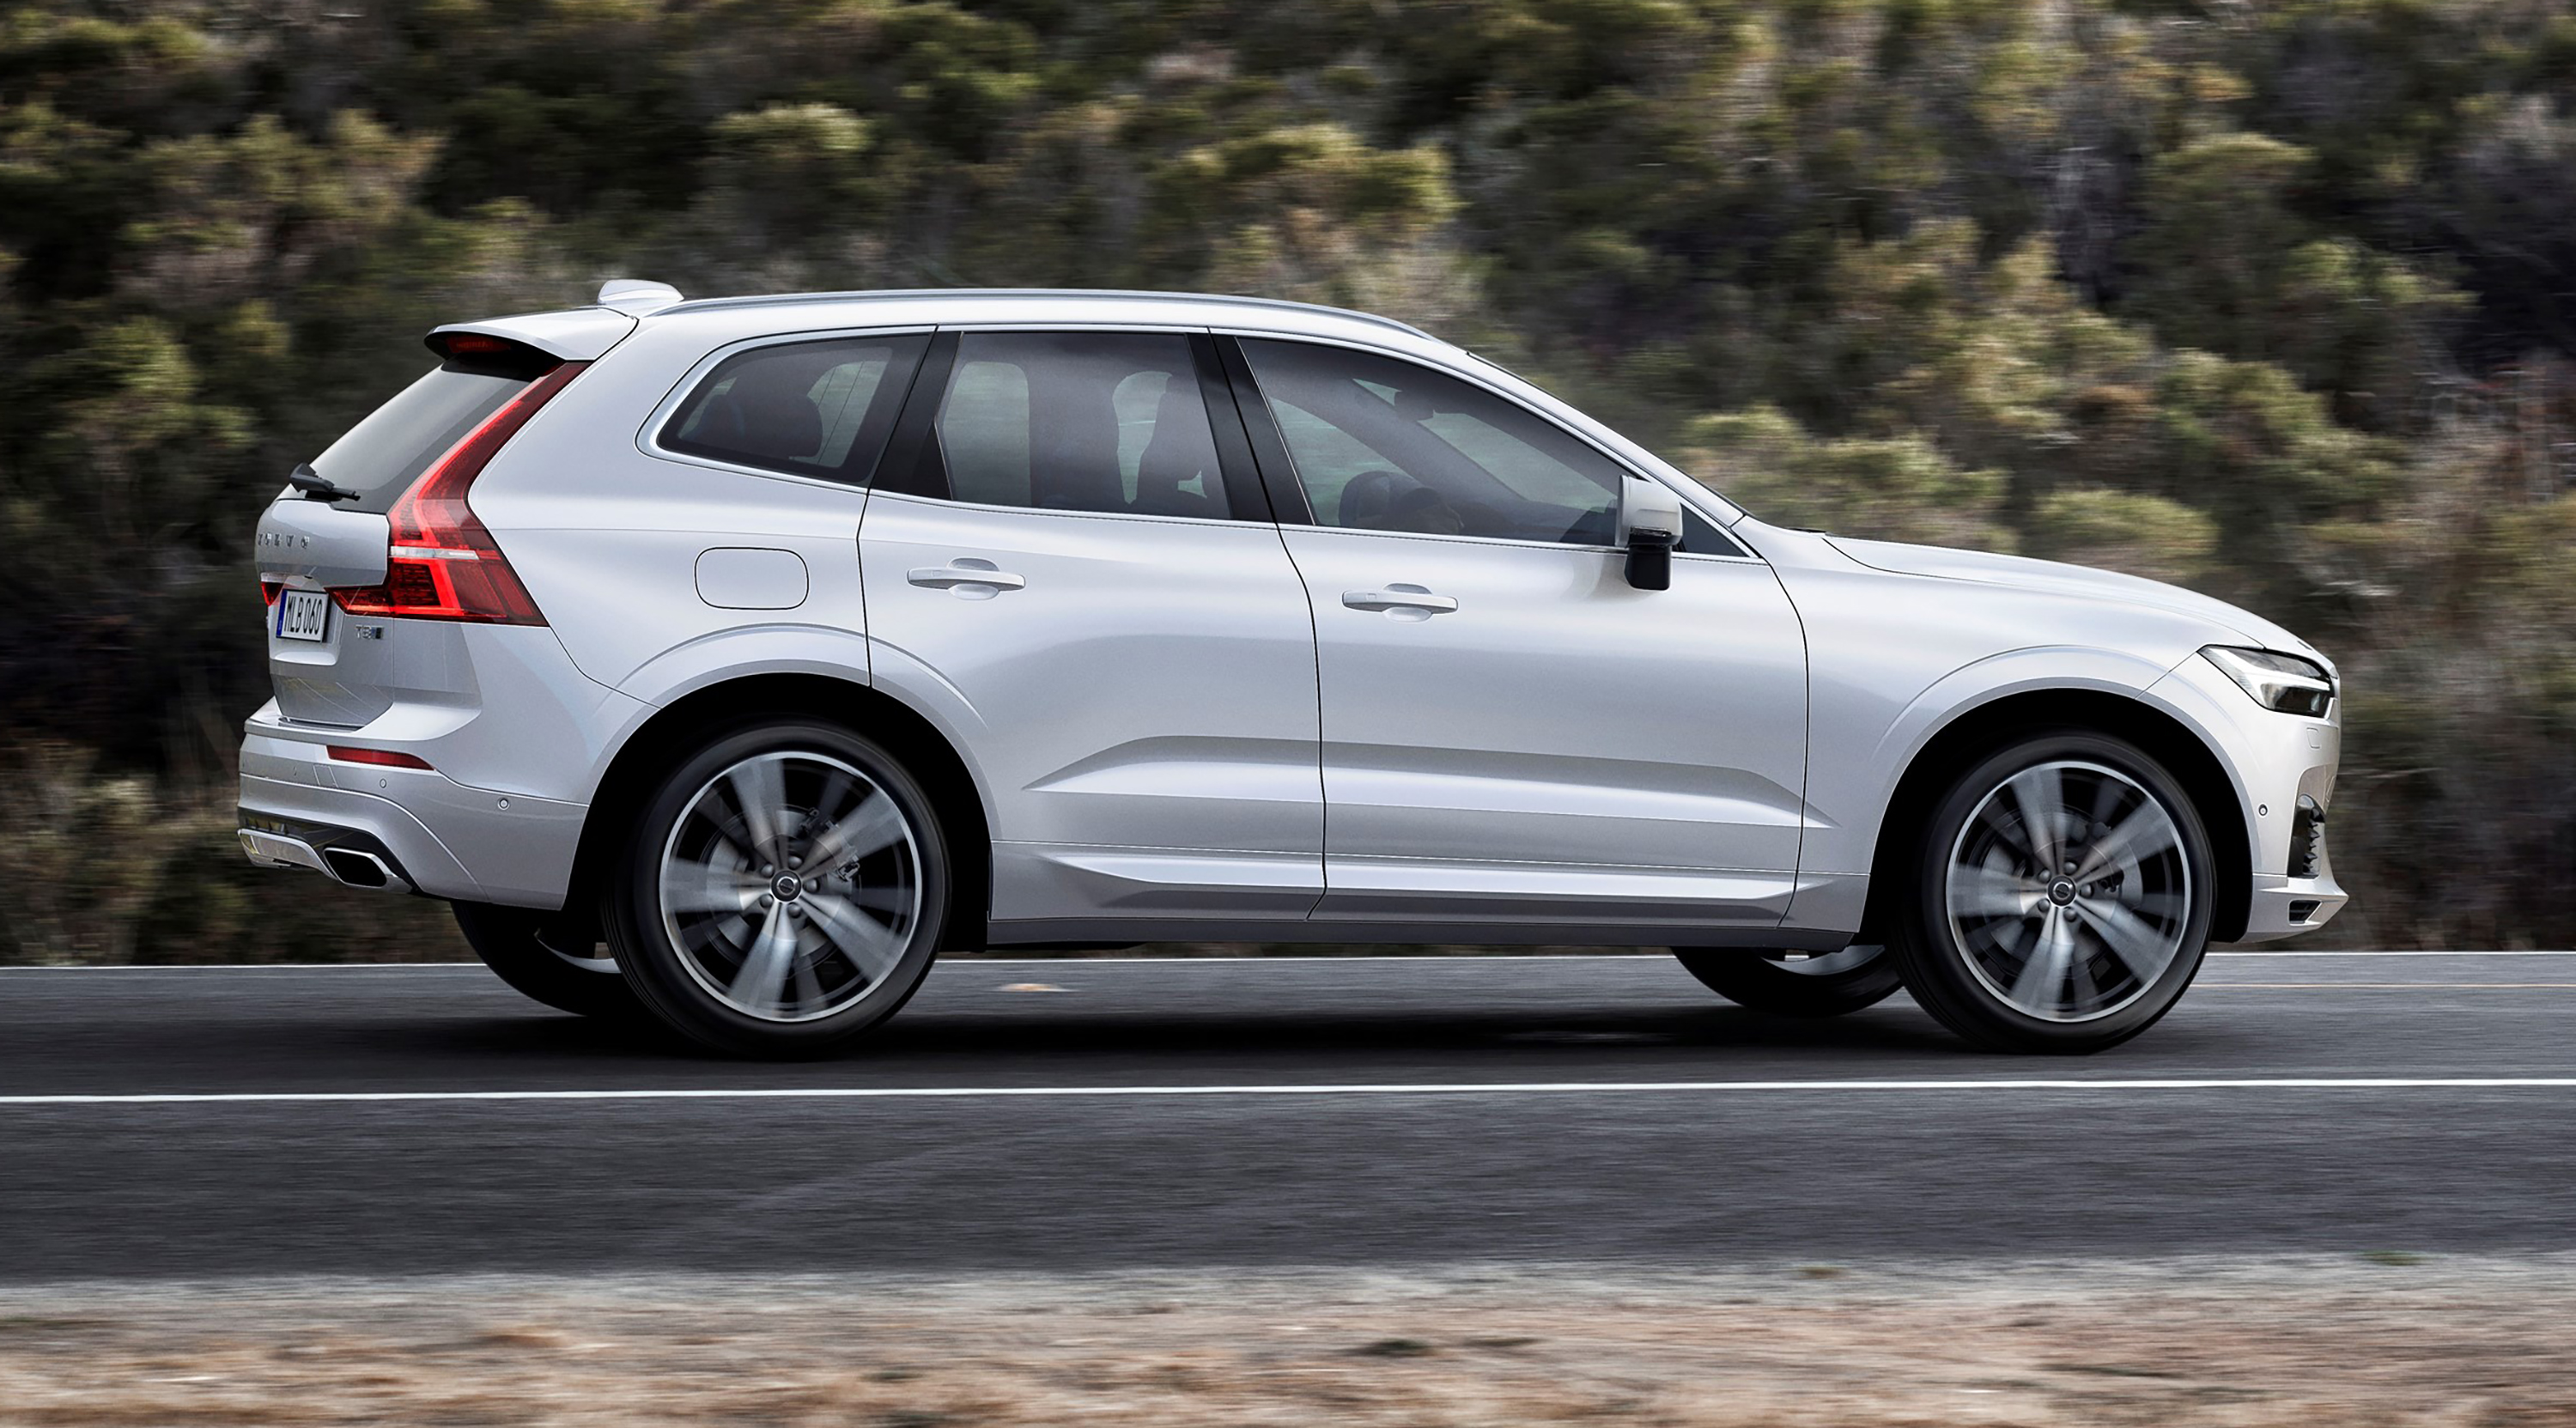 2018 Volvo XC60 detailed in new video - photos | CarAdvice